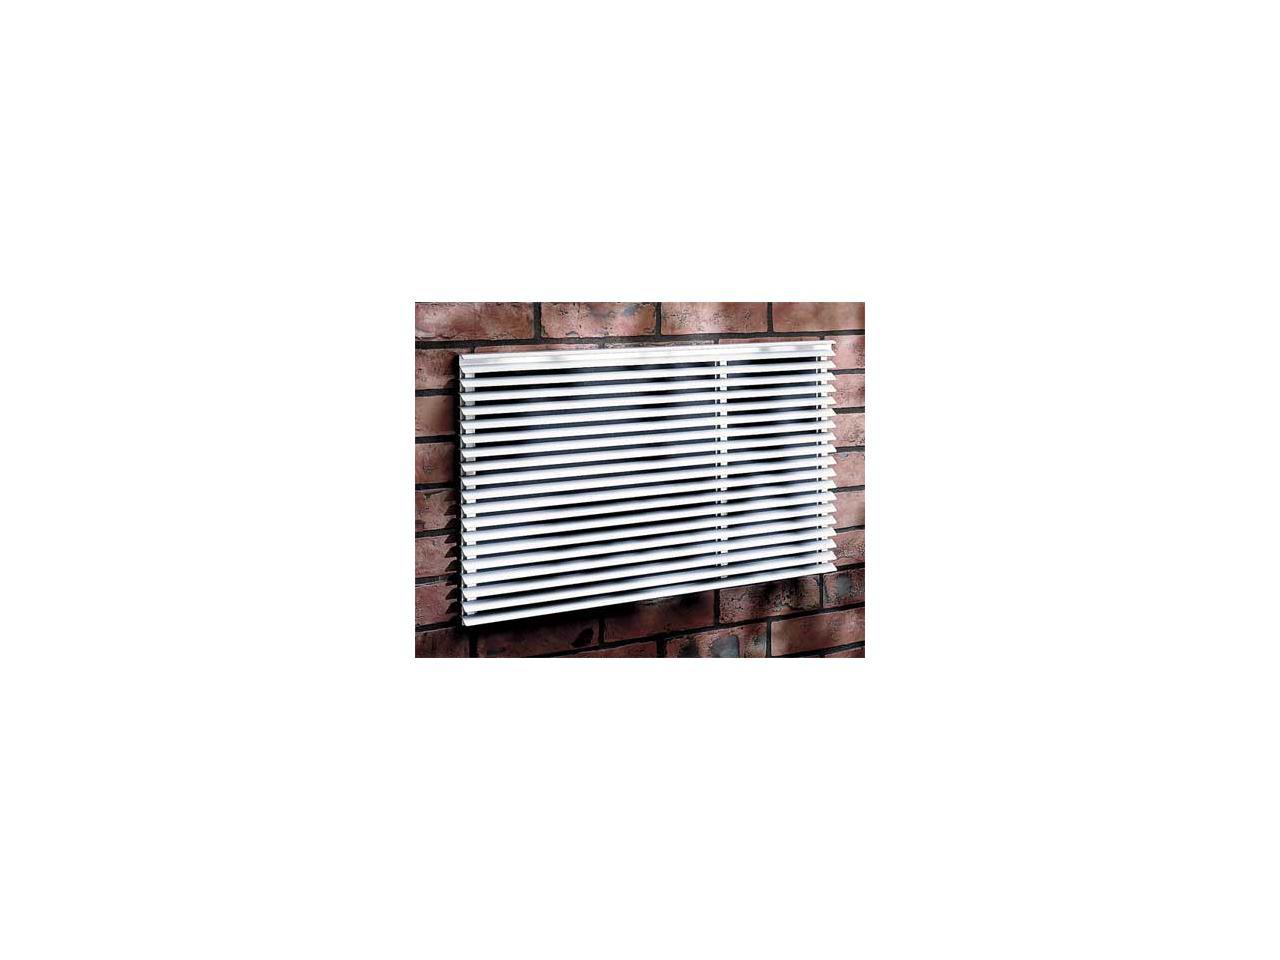 Frigidaire EA109T Protective Rear Grille for Through-the-Wall Air Conditioners